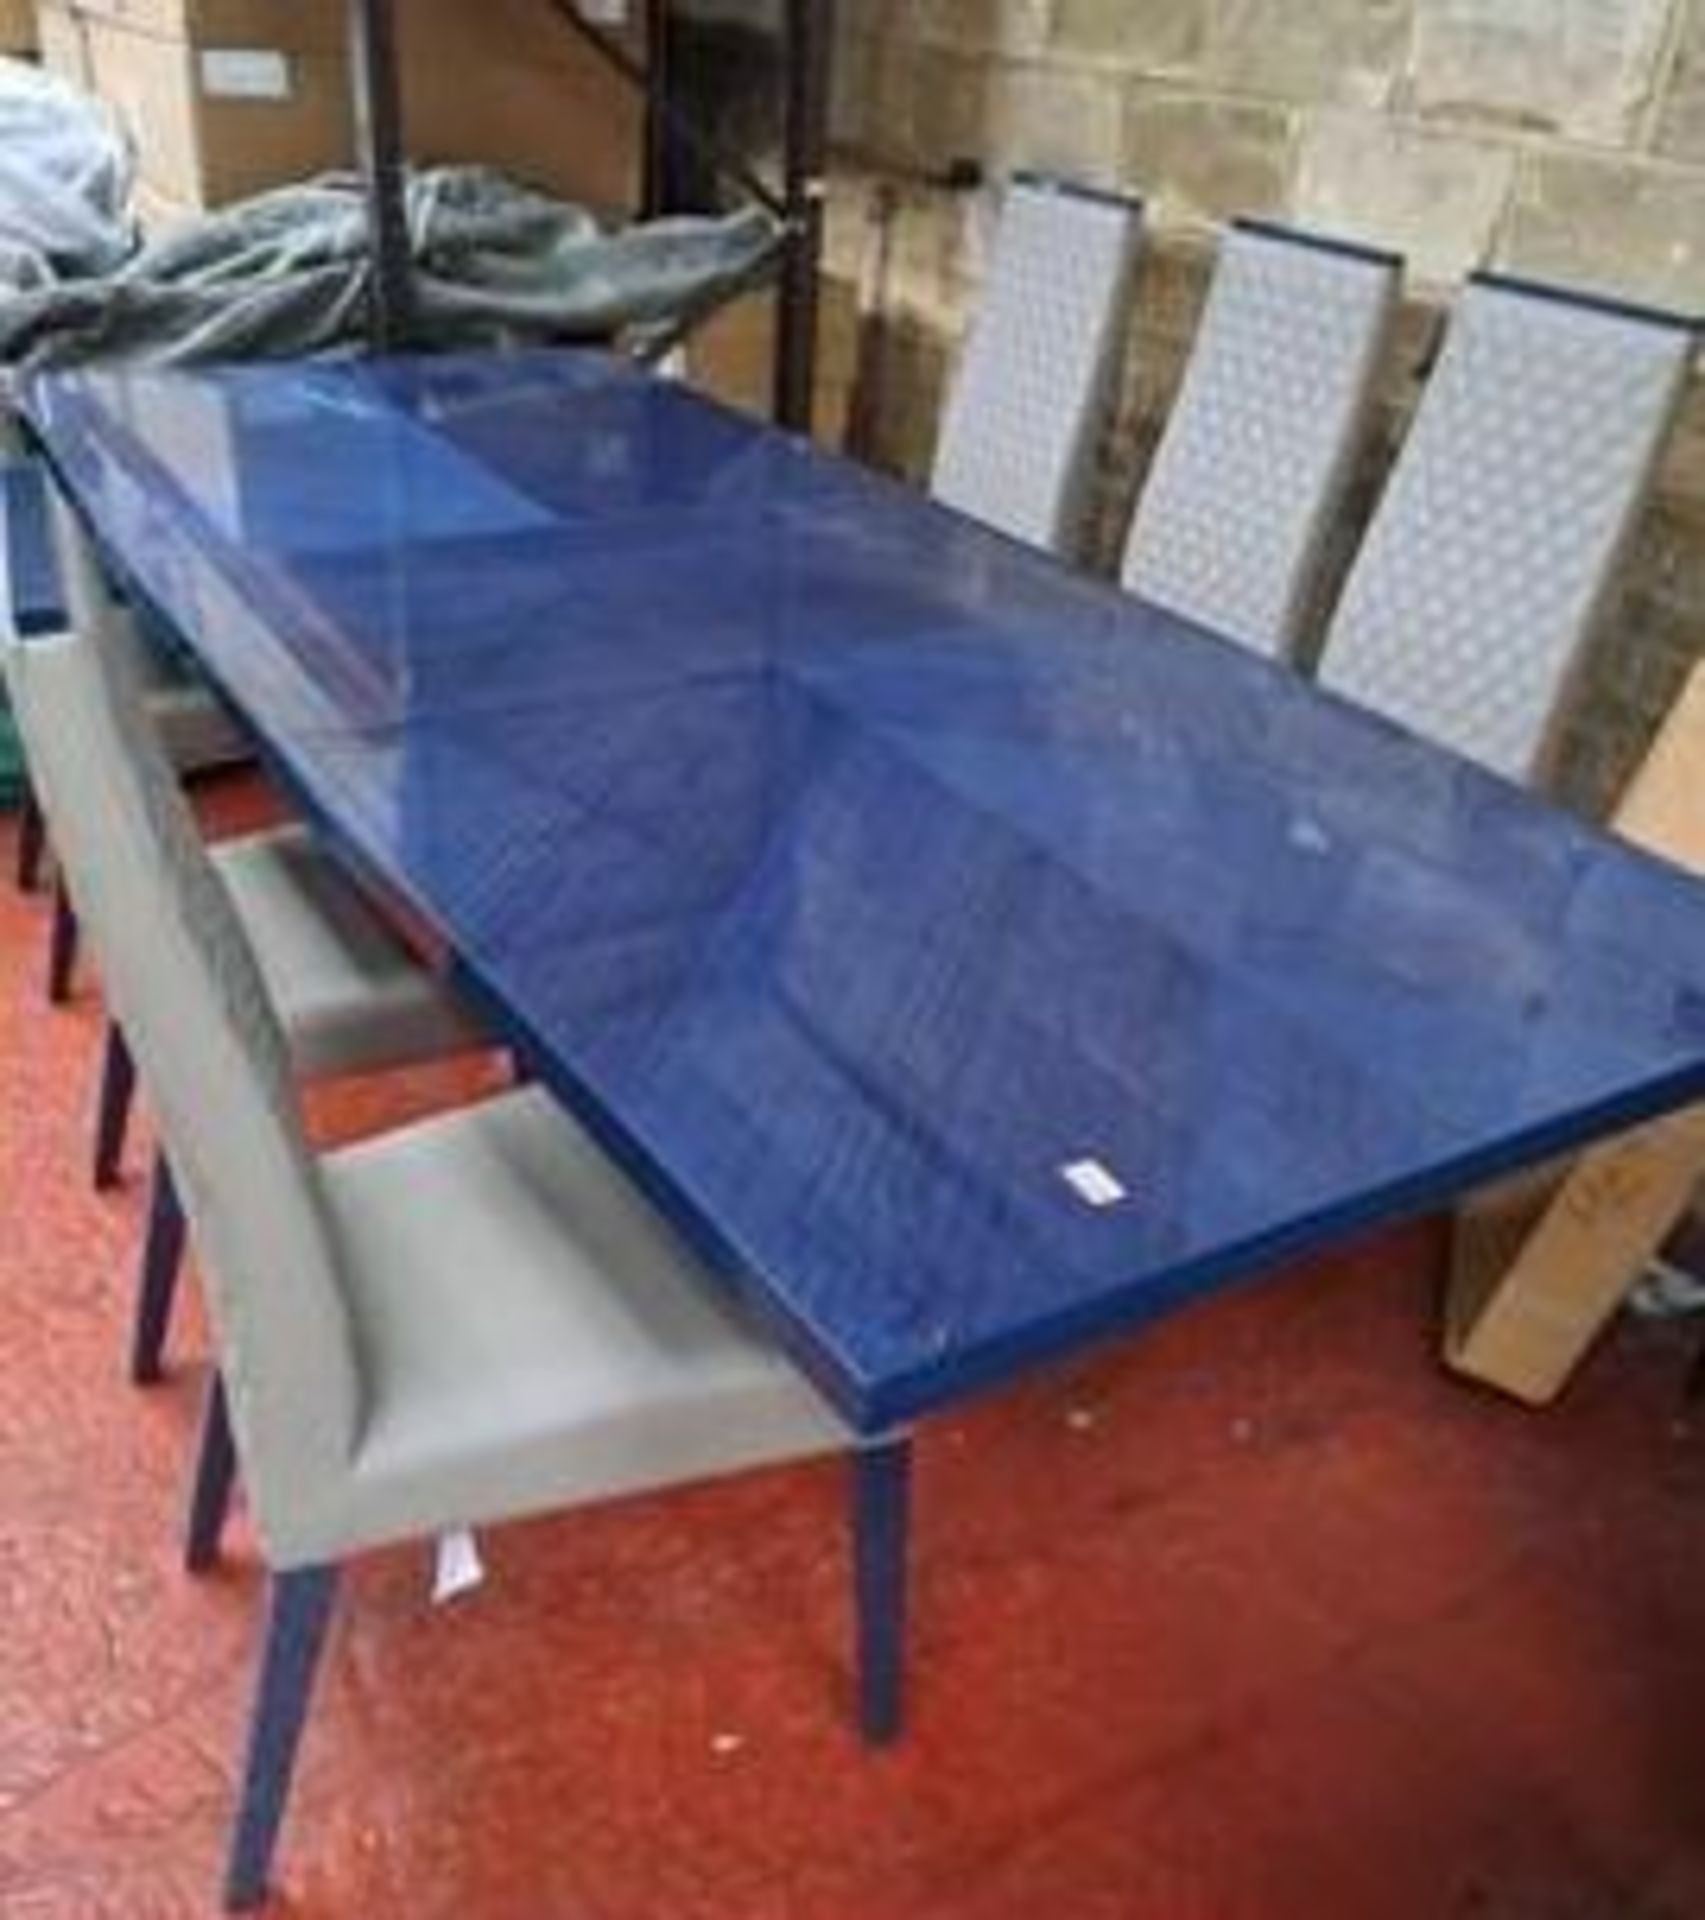 *EX DISPLAY* MAGNIFICENT Furniture Village Alf st Moritz twin pedestal blue lacquered dining table.